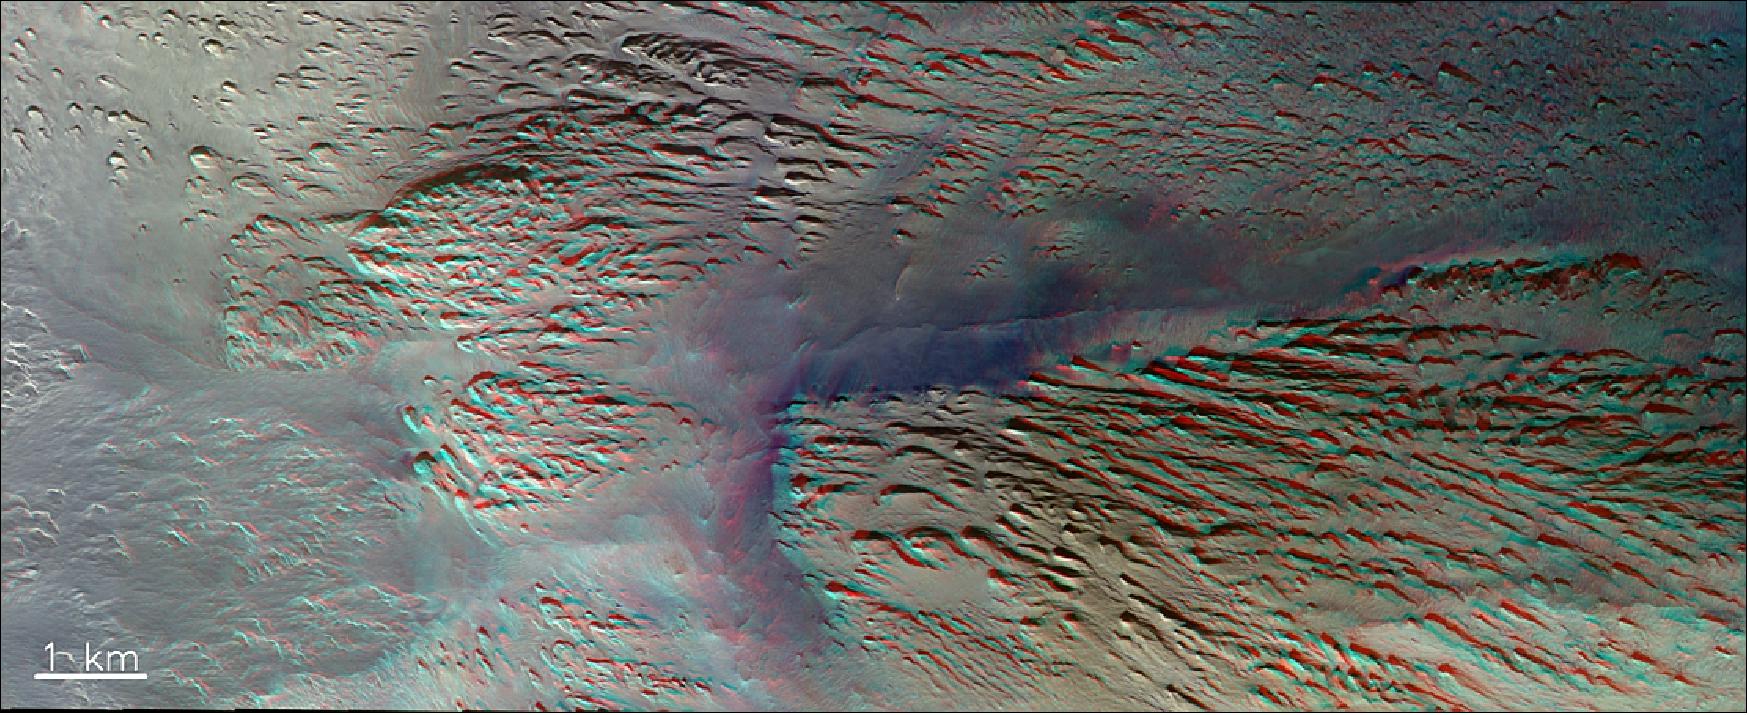 Figure 84: This image shows a part of Tithonium Chasma, on the western side of the Vallis Marineris region – also known as the ‘Grand Canyon’ of Mars. The observed area is part of the Western Tithonium Dome. Rocky outcrops are seen at different elevations – best seen when viewed through red-blue stereo ‘3D’ glasses. The structures have been interpreted as the result of erosion – perhaps by flowing water. Bluer hues indicate dust. The image was created from a stereo pair taken by the CaSSIS instrument onboard the ESA-Roscosmos ExoMars TGO on 5 February 2019 (image credit: ESA/Roscosmos/CaSSIS, CC BY-SA 3.0 IGO)